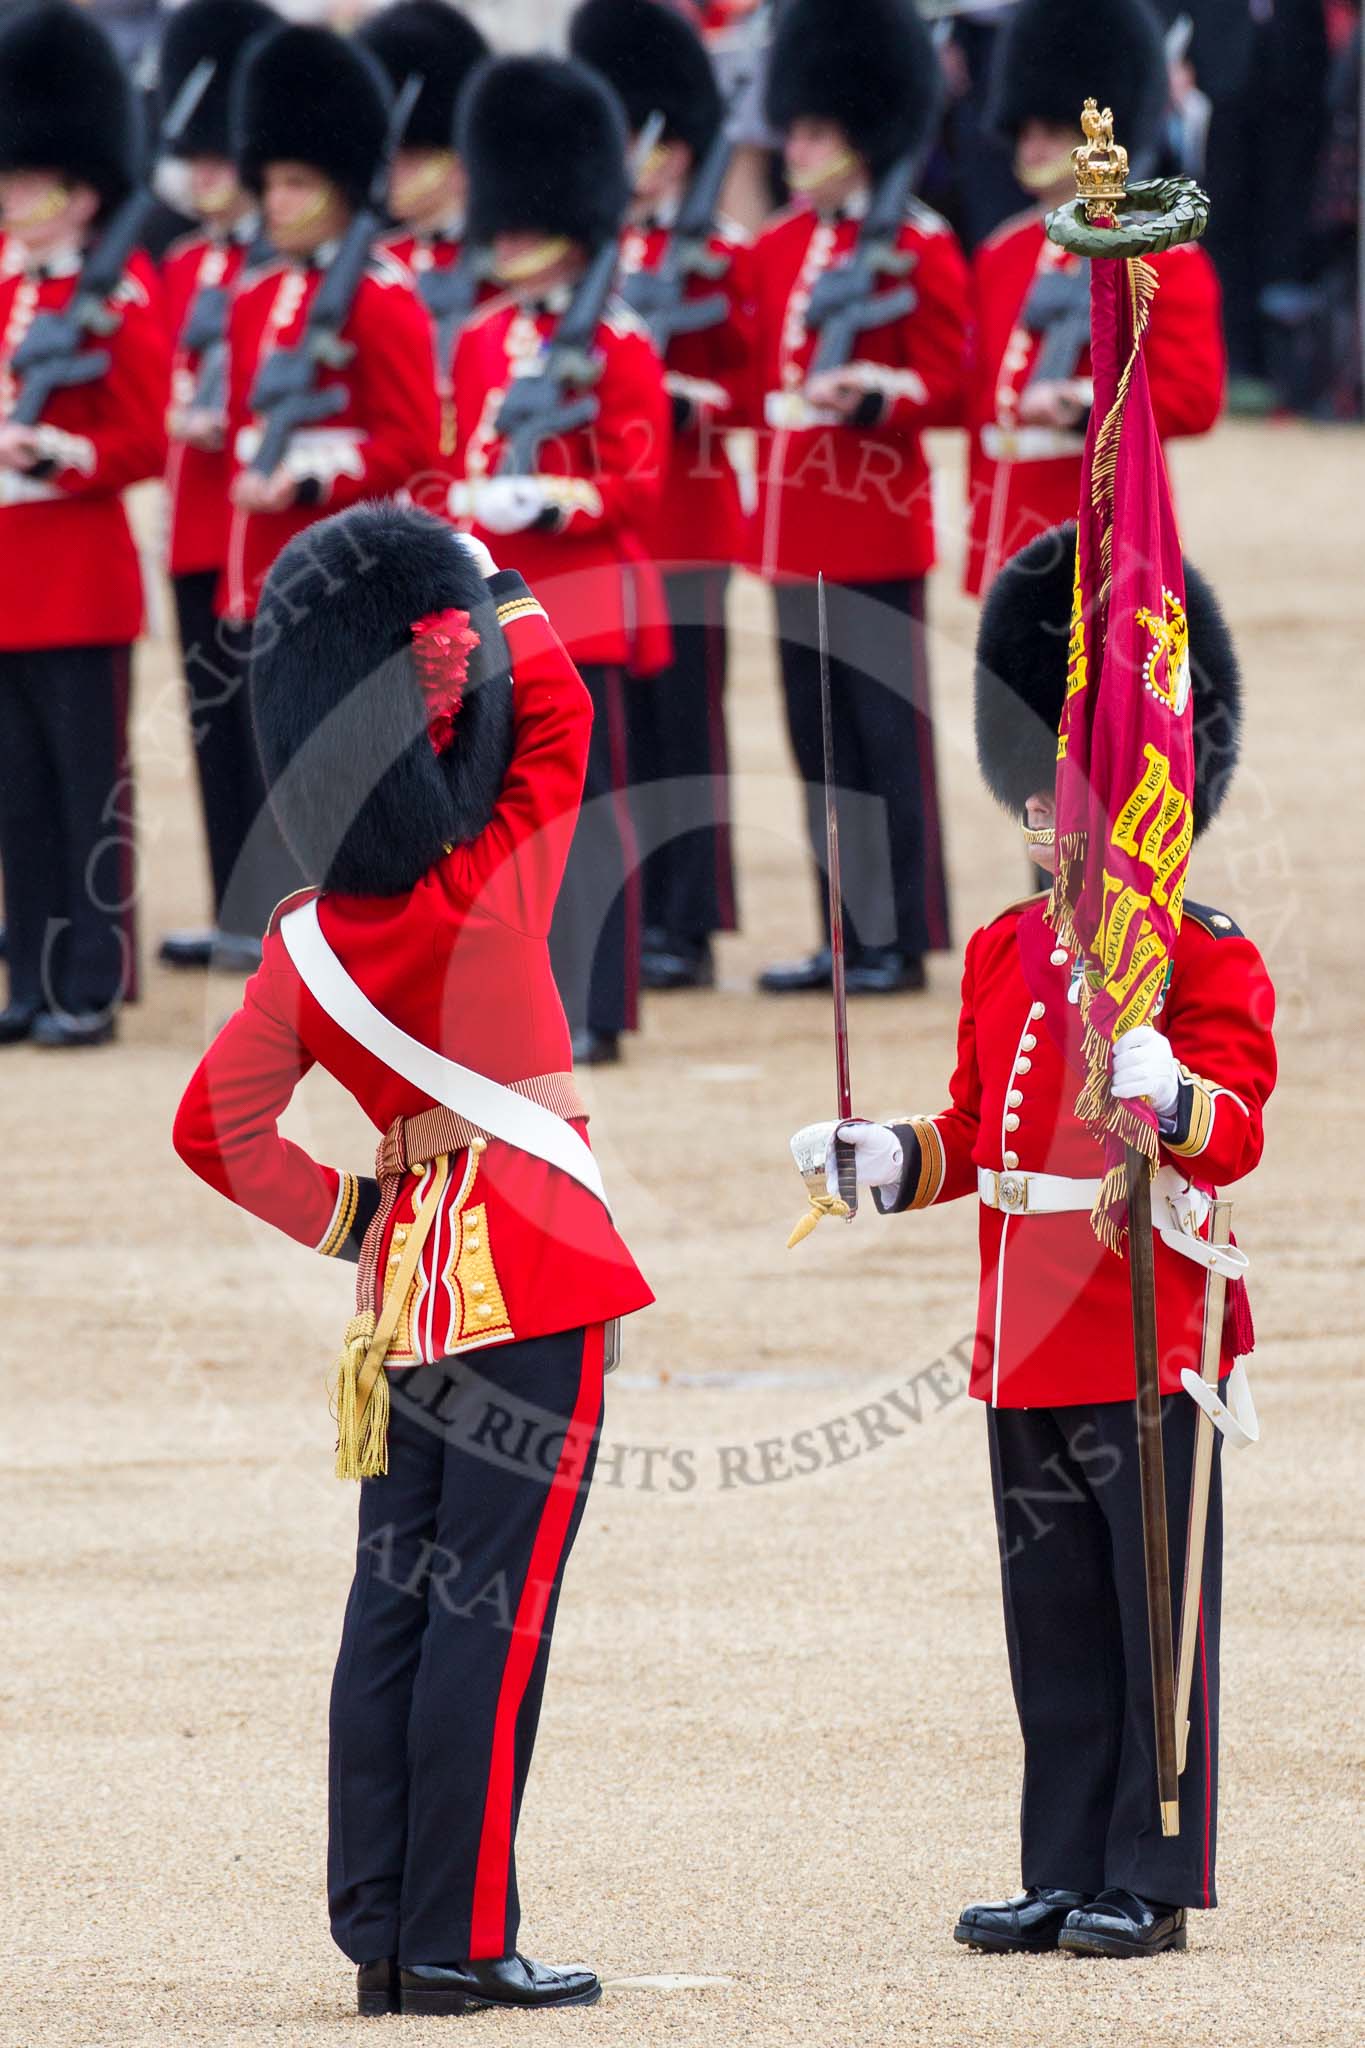 Trooping the Colour 2012: The Regimental Sergeant Major of No. 1 Guard, pushes his sord to safety, before receiving the Colour from the Colour Sergeant..
Horse Guards Parade, Westminster,
London SW1,

United Kingdom,
on 16 June 2012 at 11:21, image #306